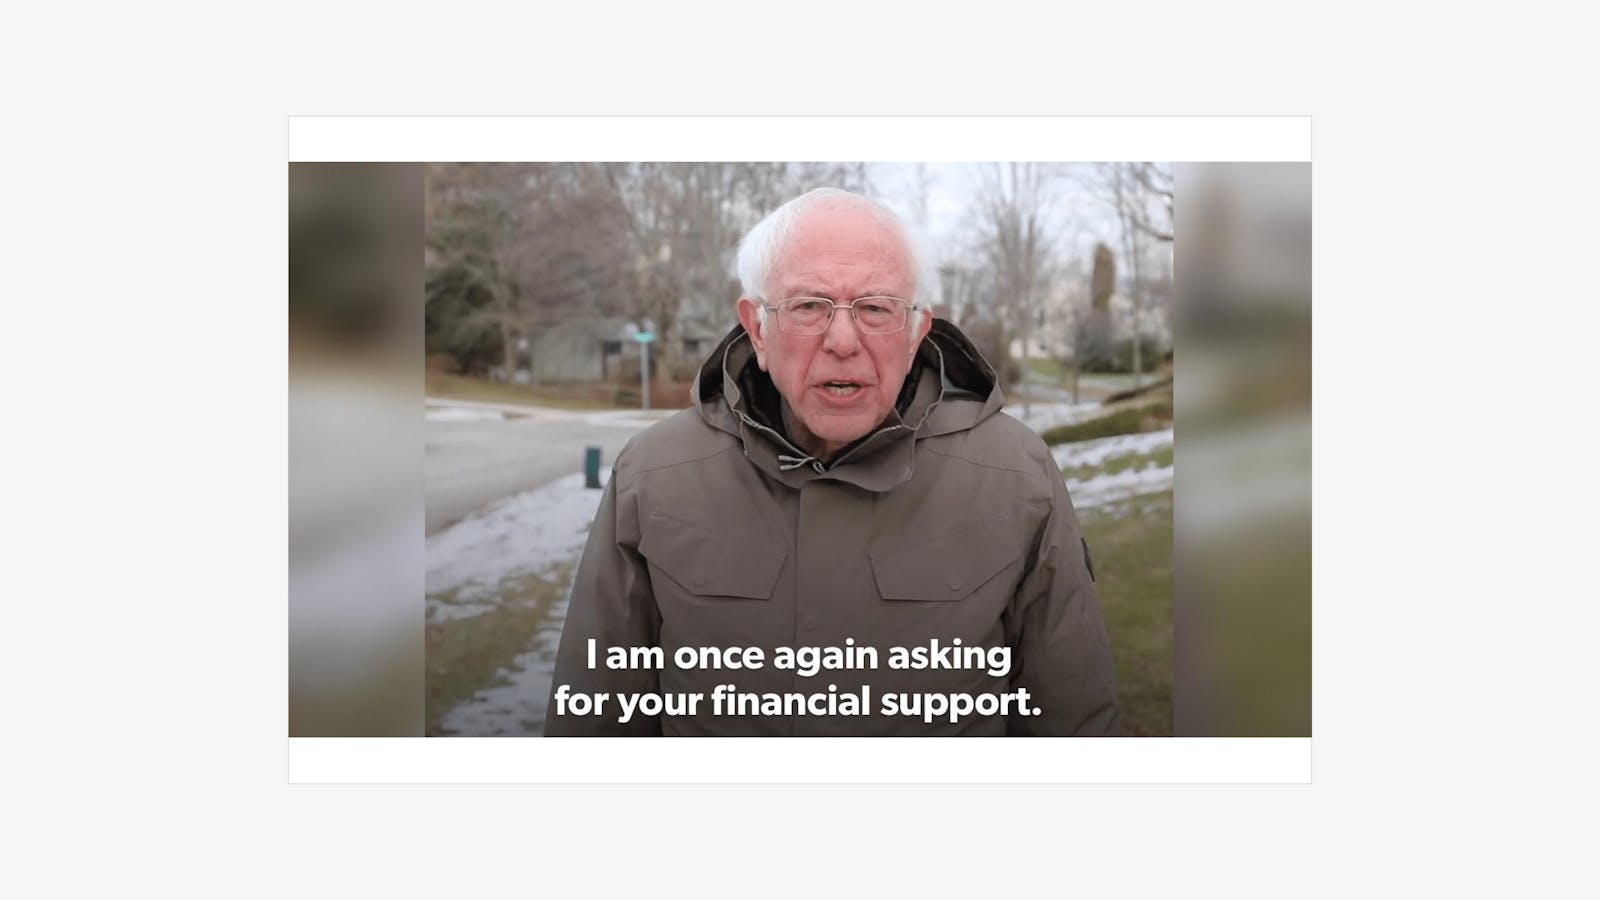 Funny and relatable restaurant meme with Bernie Sanders asking for financial support. 